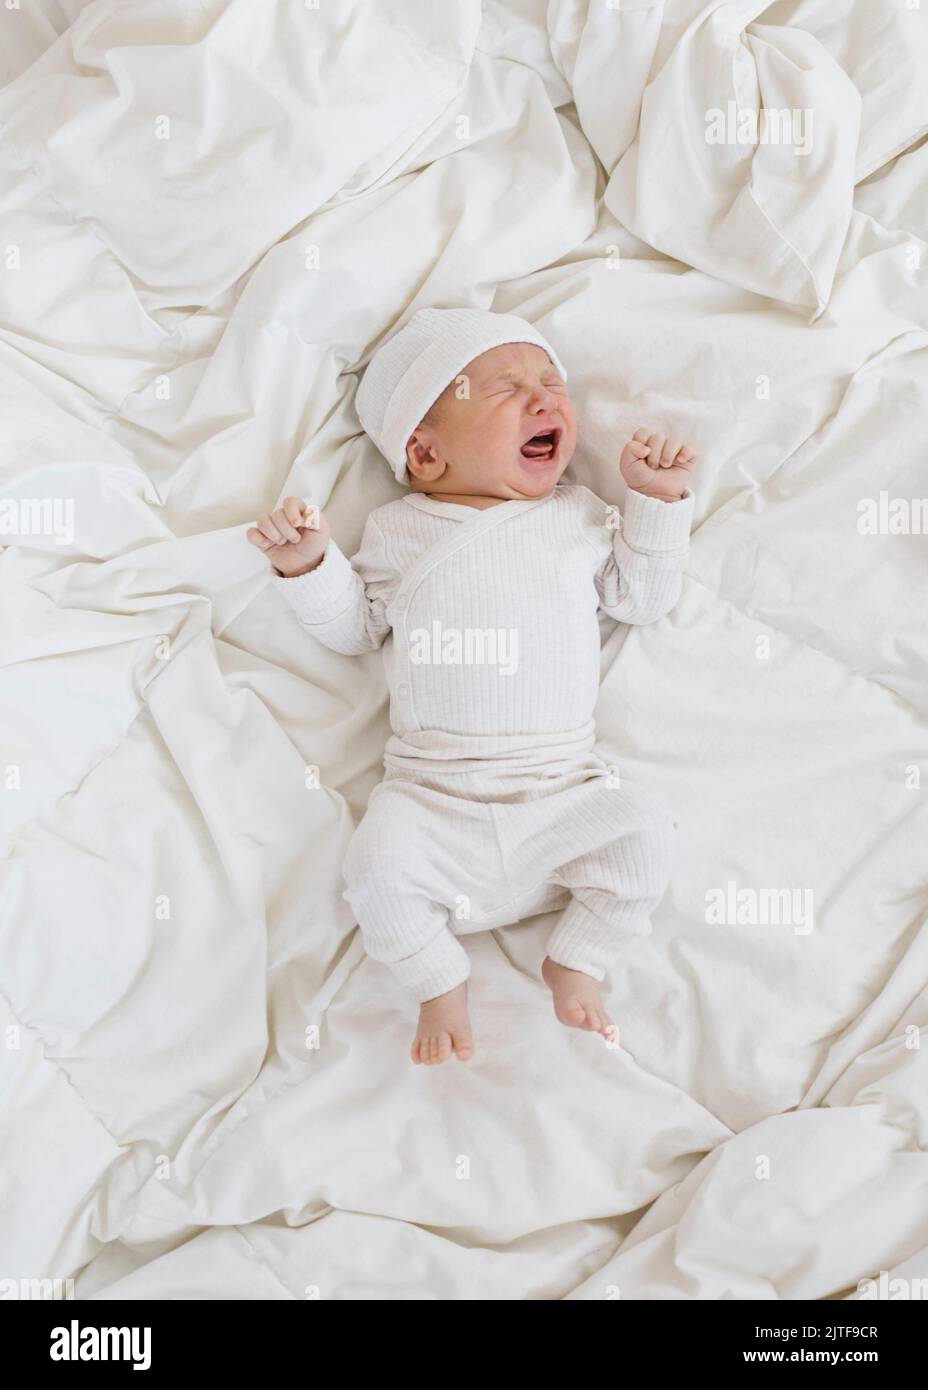 Overhead view of newborn boy (0-1 months) crying on bed Stock Photo